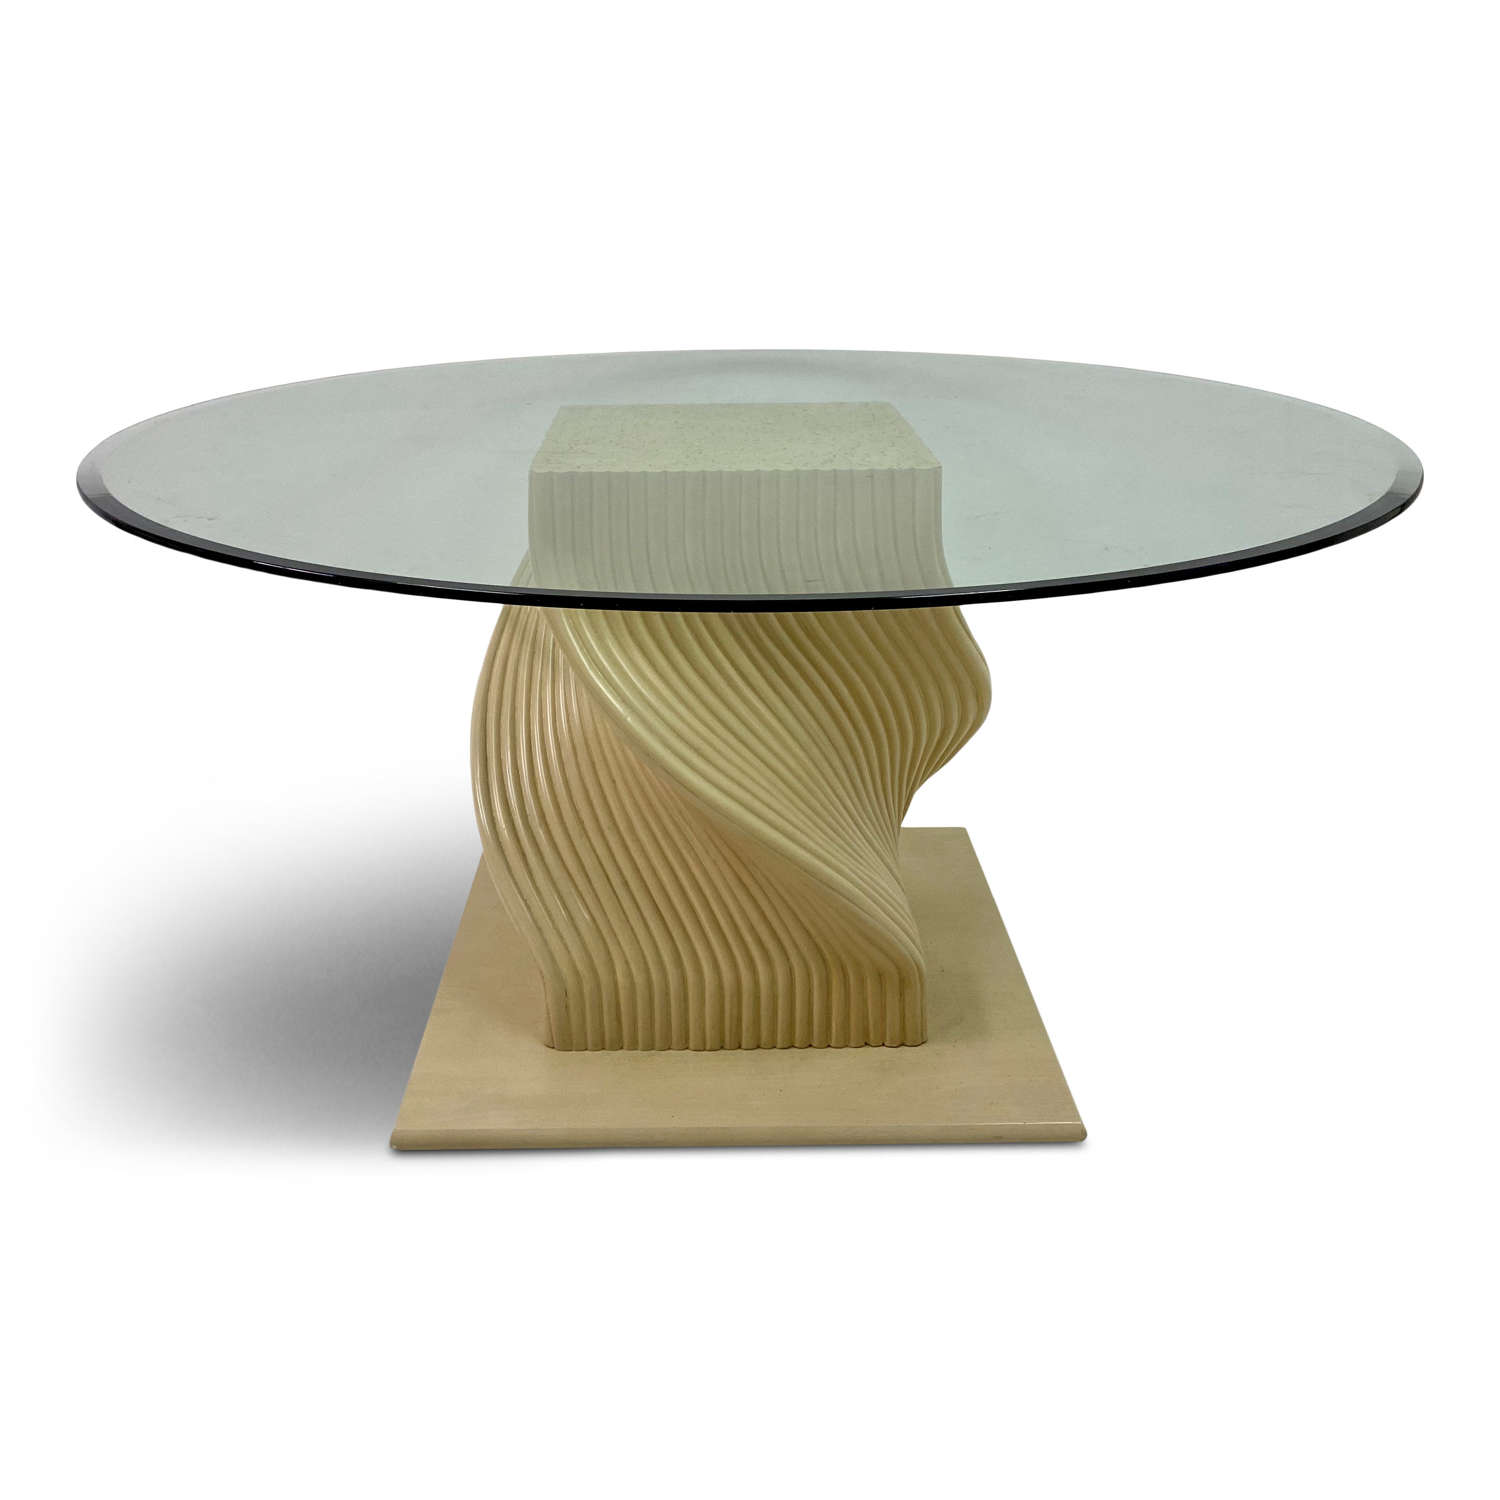 1980s spiral bamboo dining table with glass top